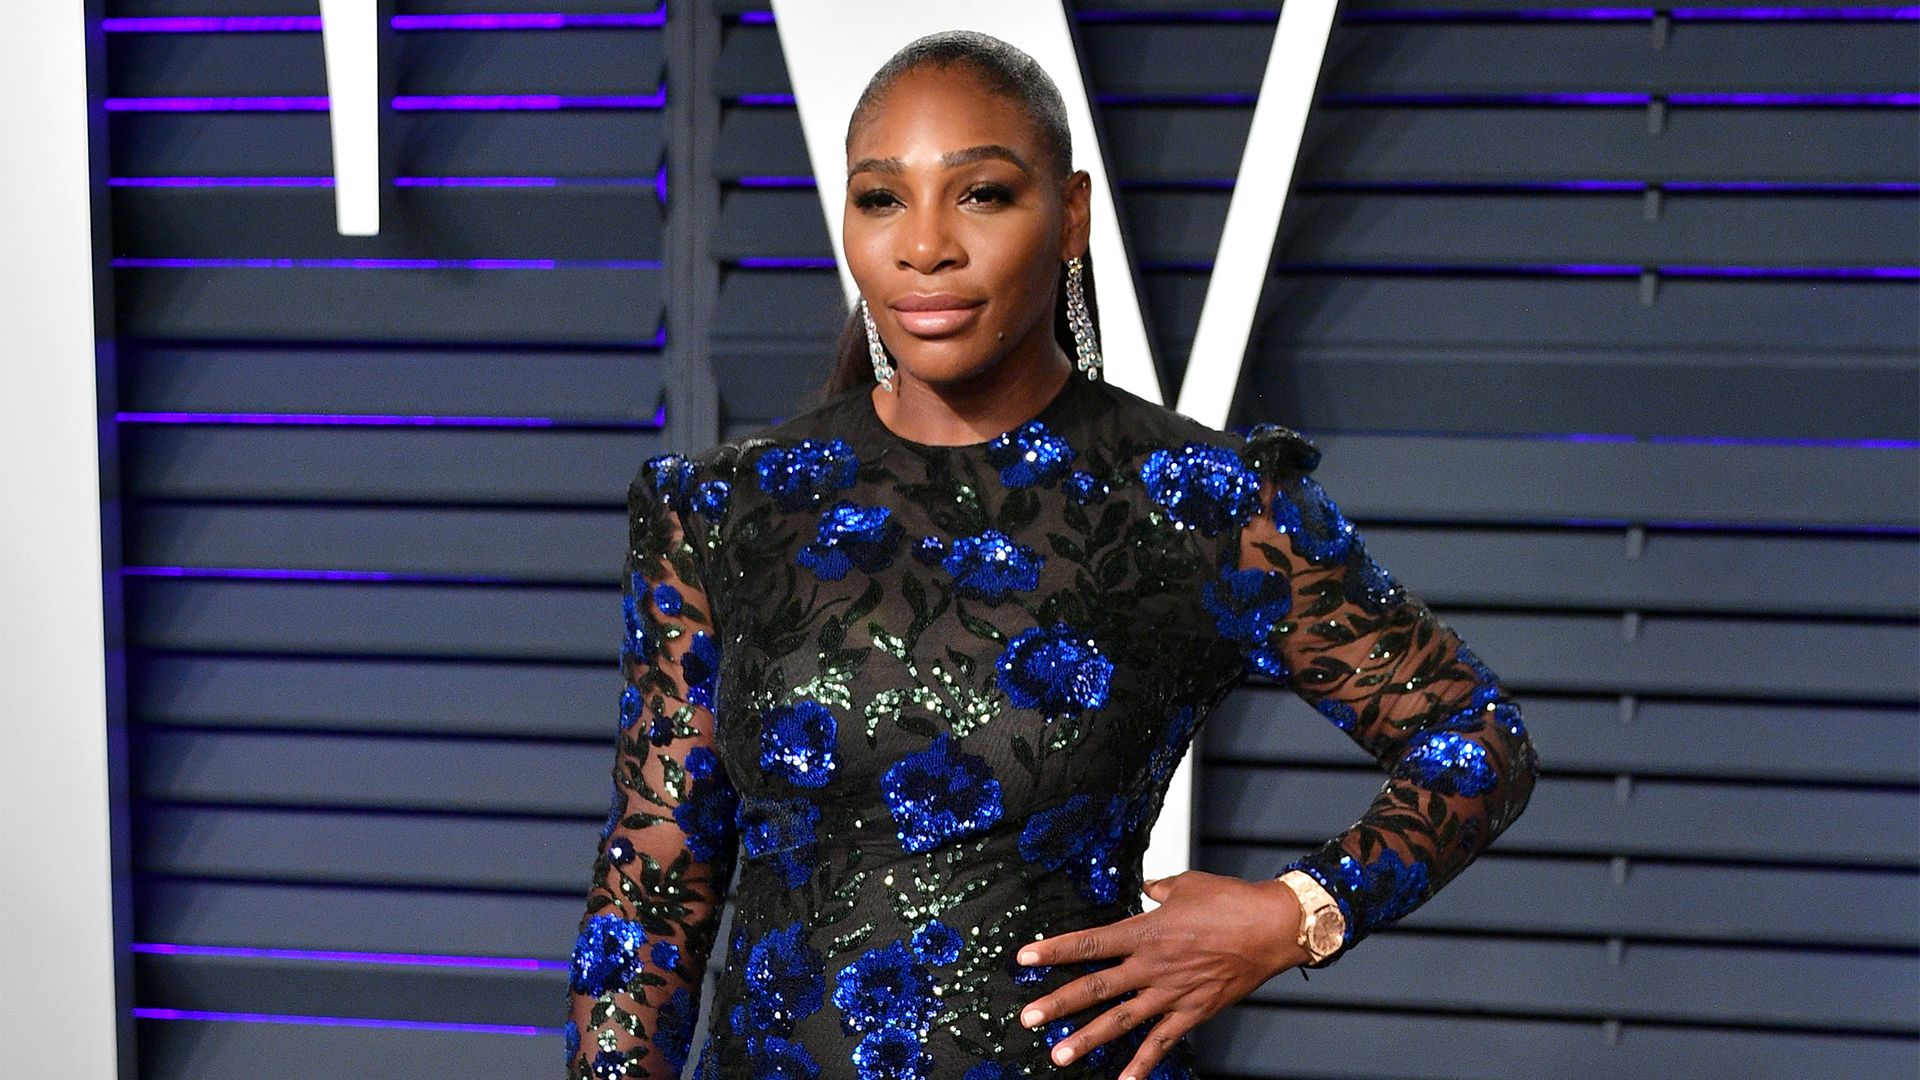 Self-Made GOAT: Serena Williams' $240M Worth Of Business Ventures Will Surprise You